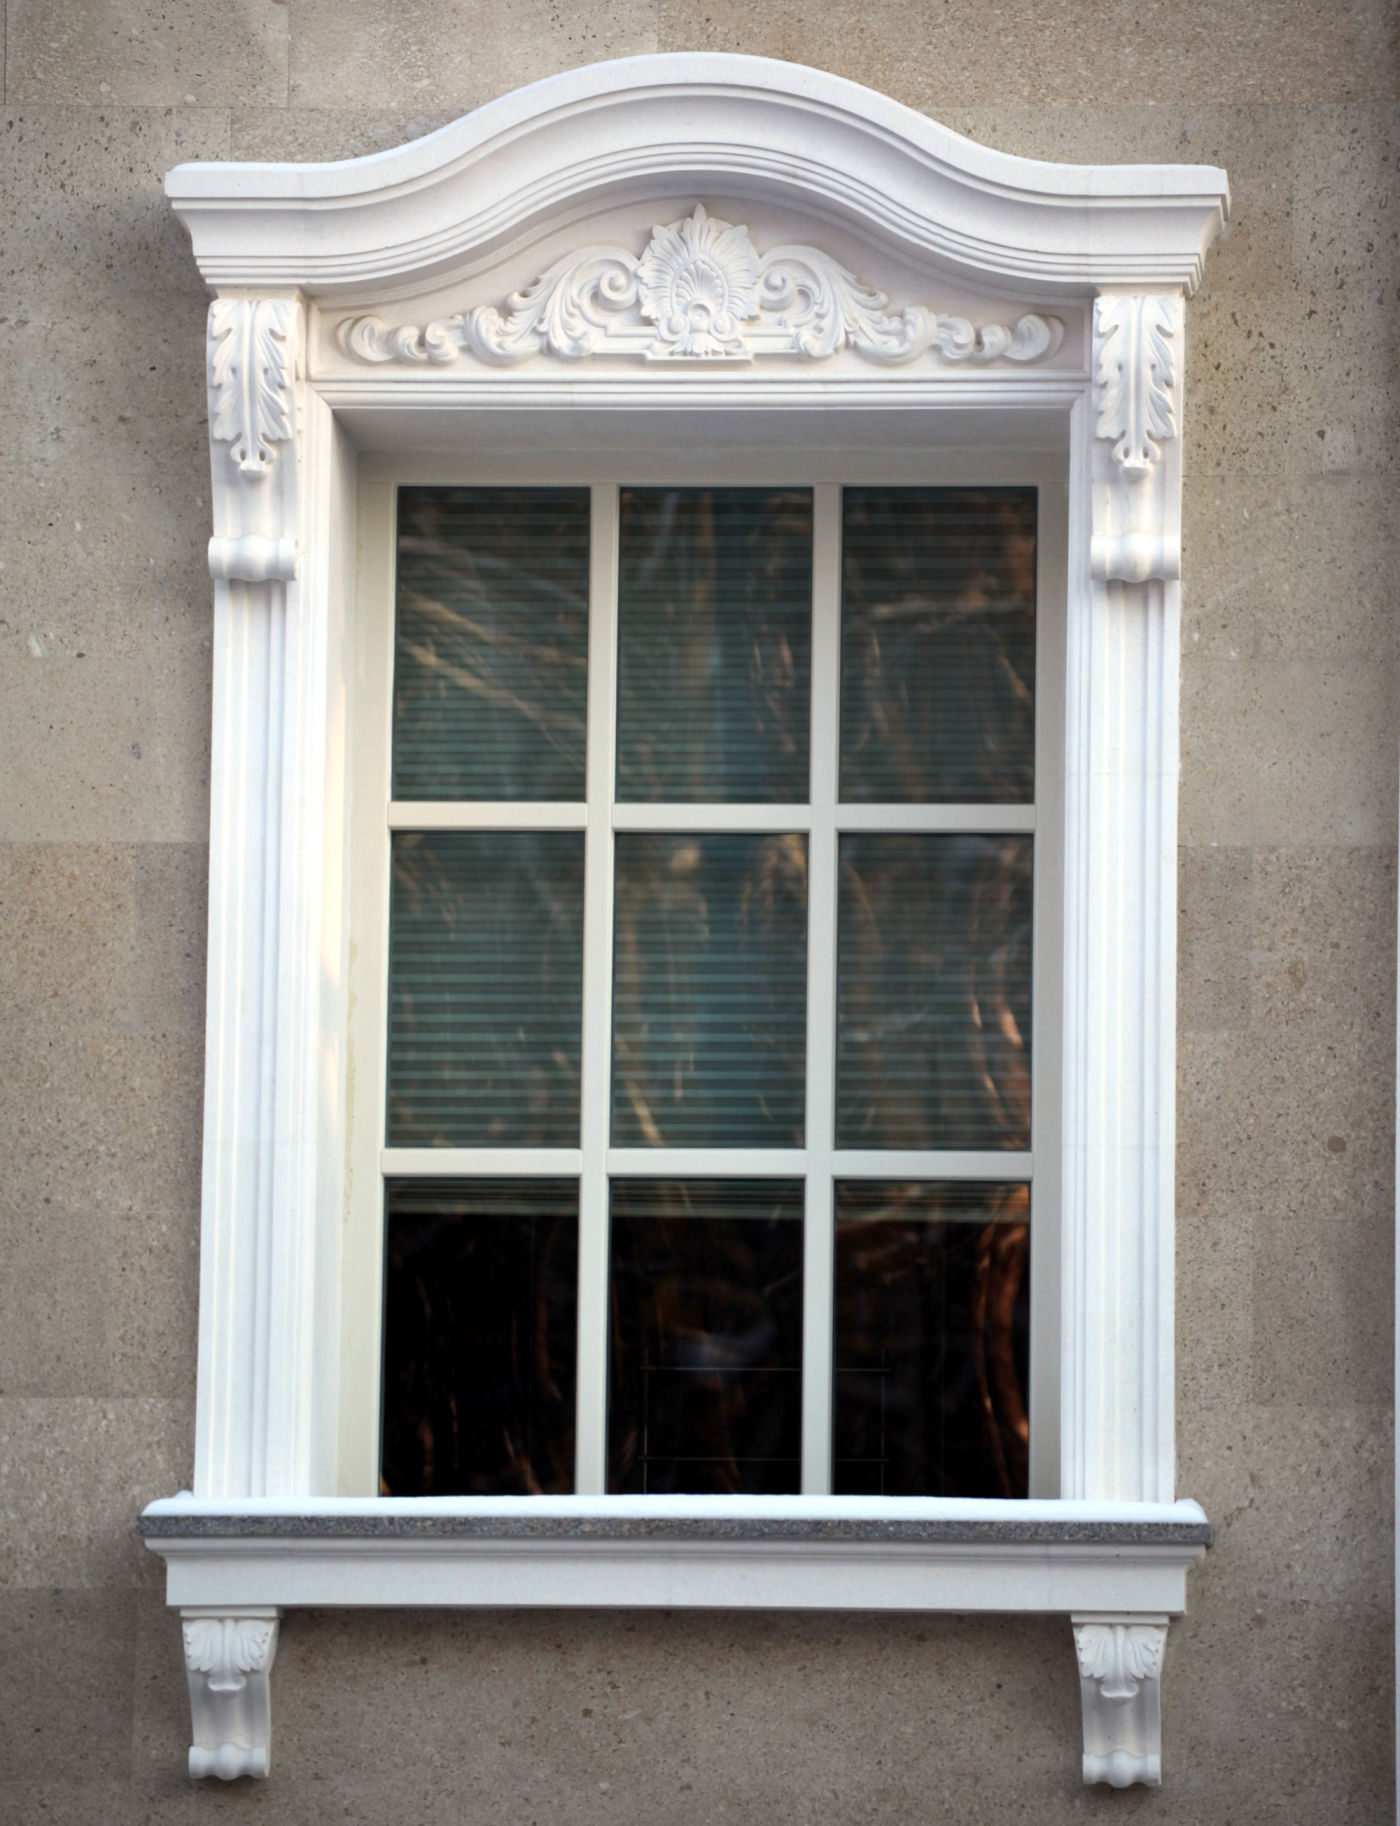 A window in a classical style.